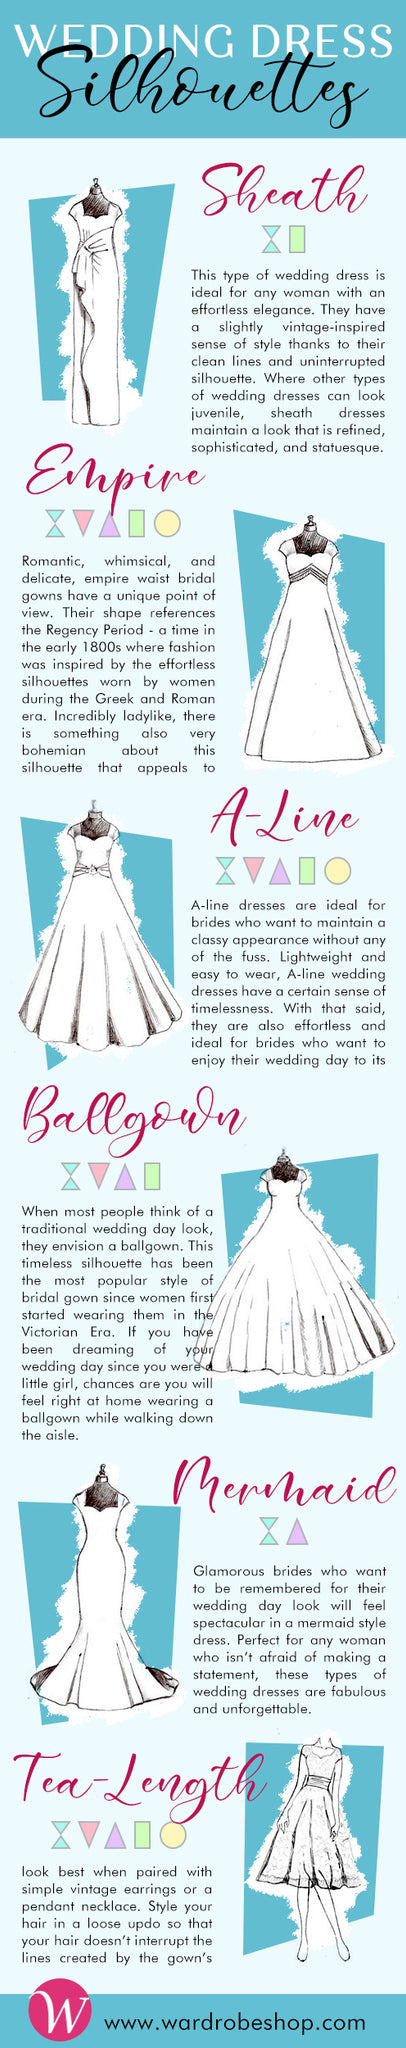 A Beginner's Guide To Different Types Of Dresses | Daily Infographic